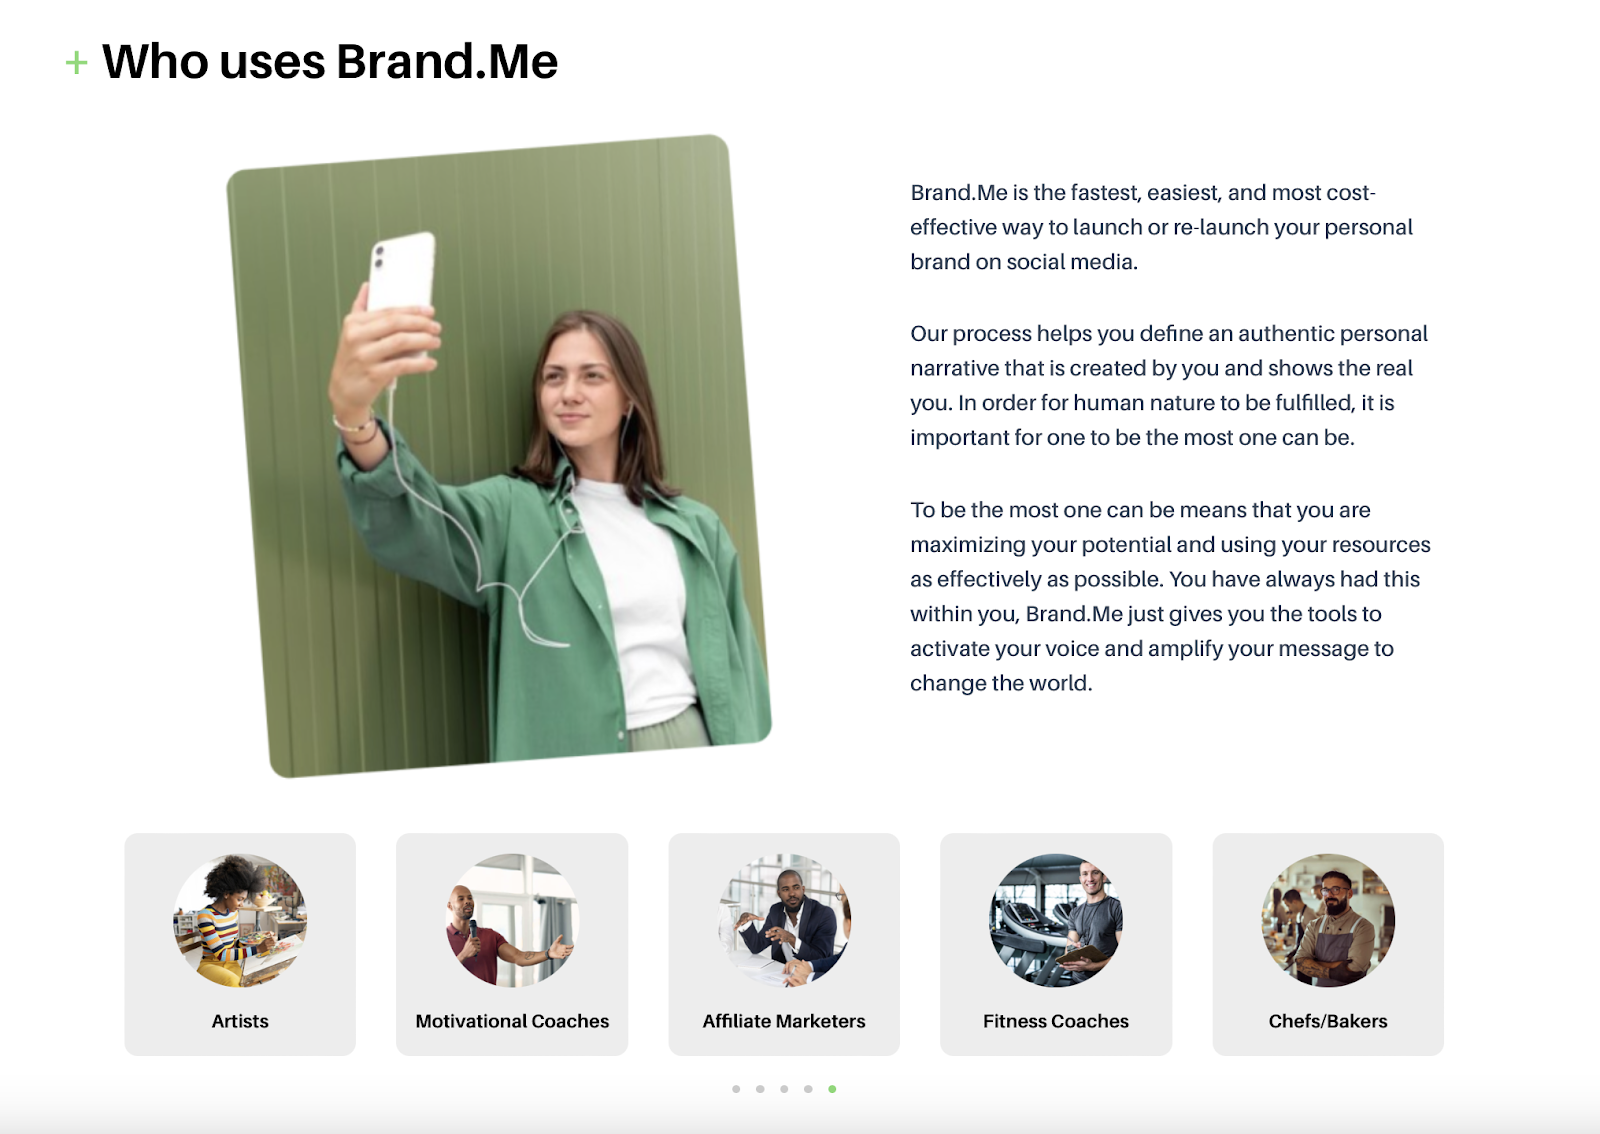 who uses brand.me section